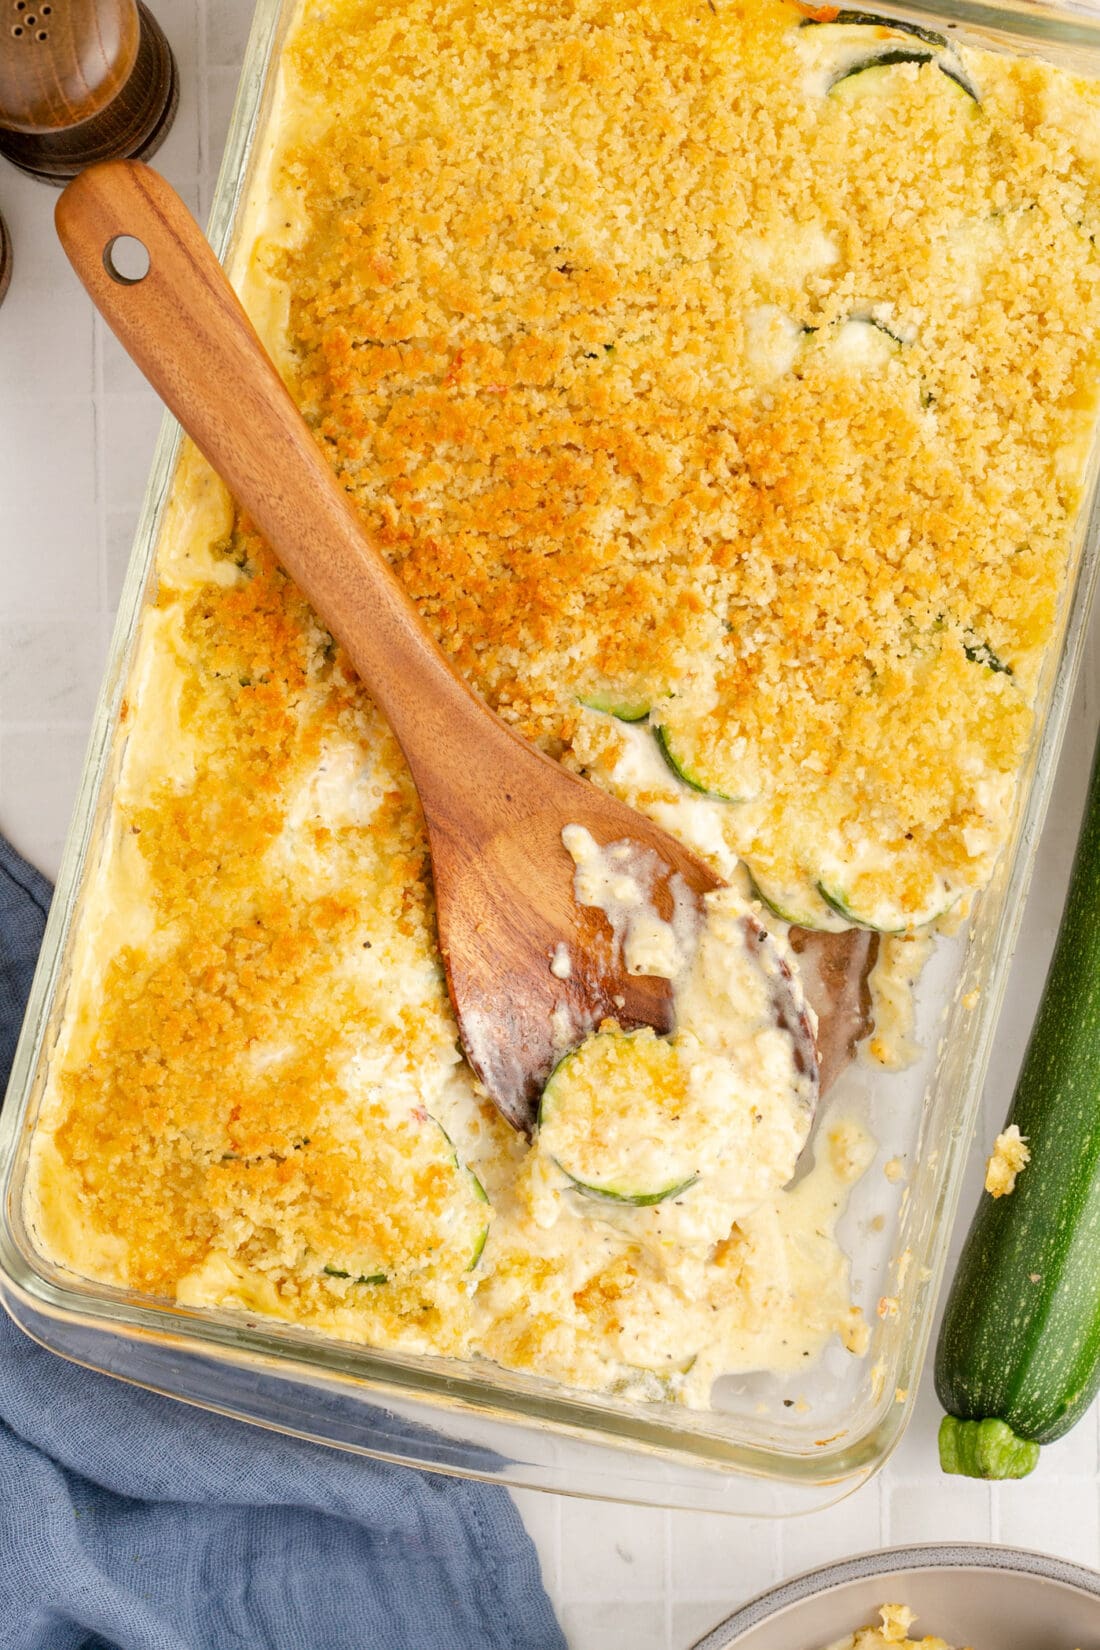 Spoon resting in a pan of Zucchini Casserole